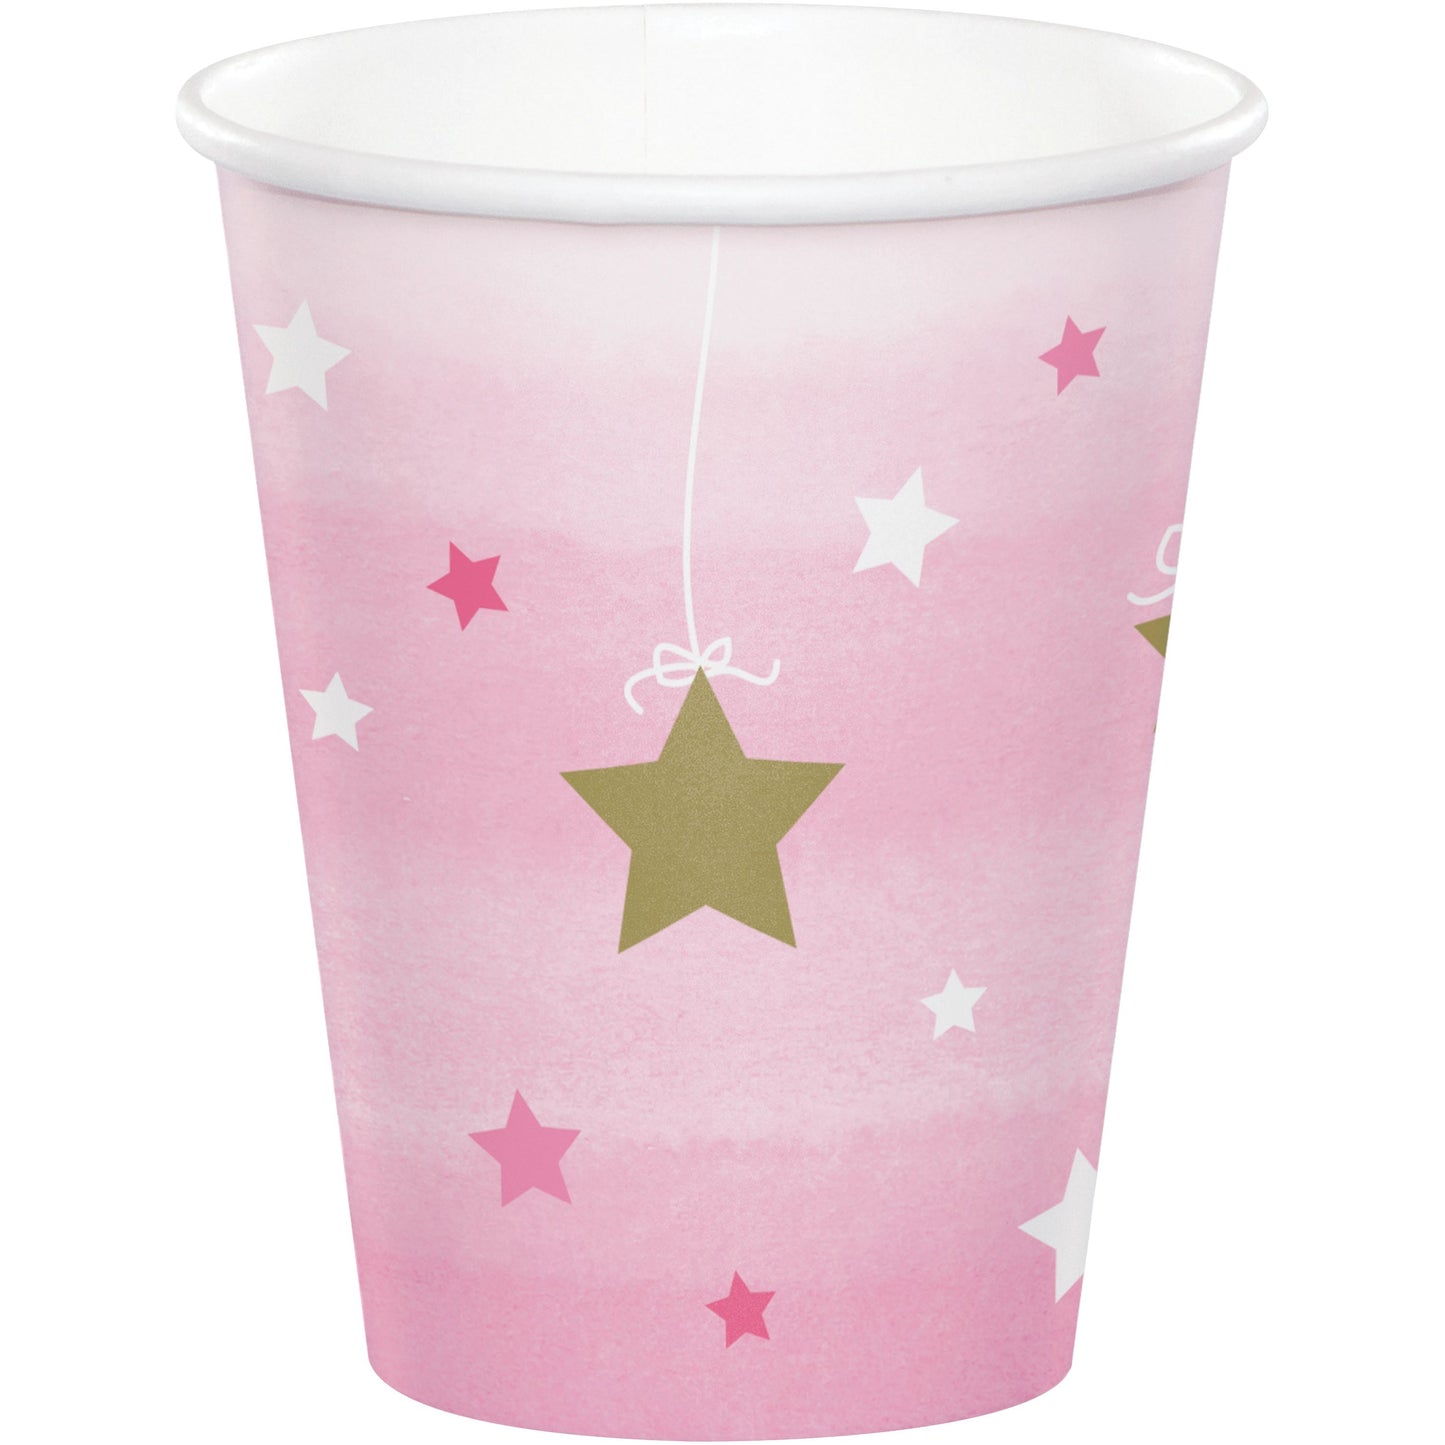 Cups - One Little Star (Pink) 8ct